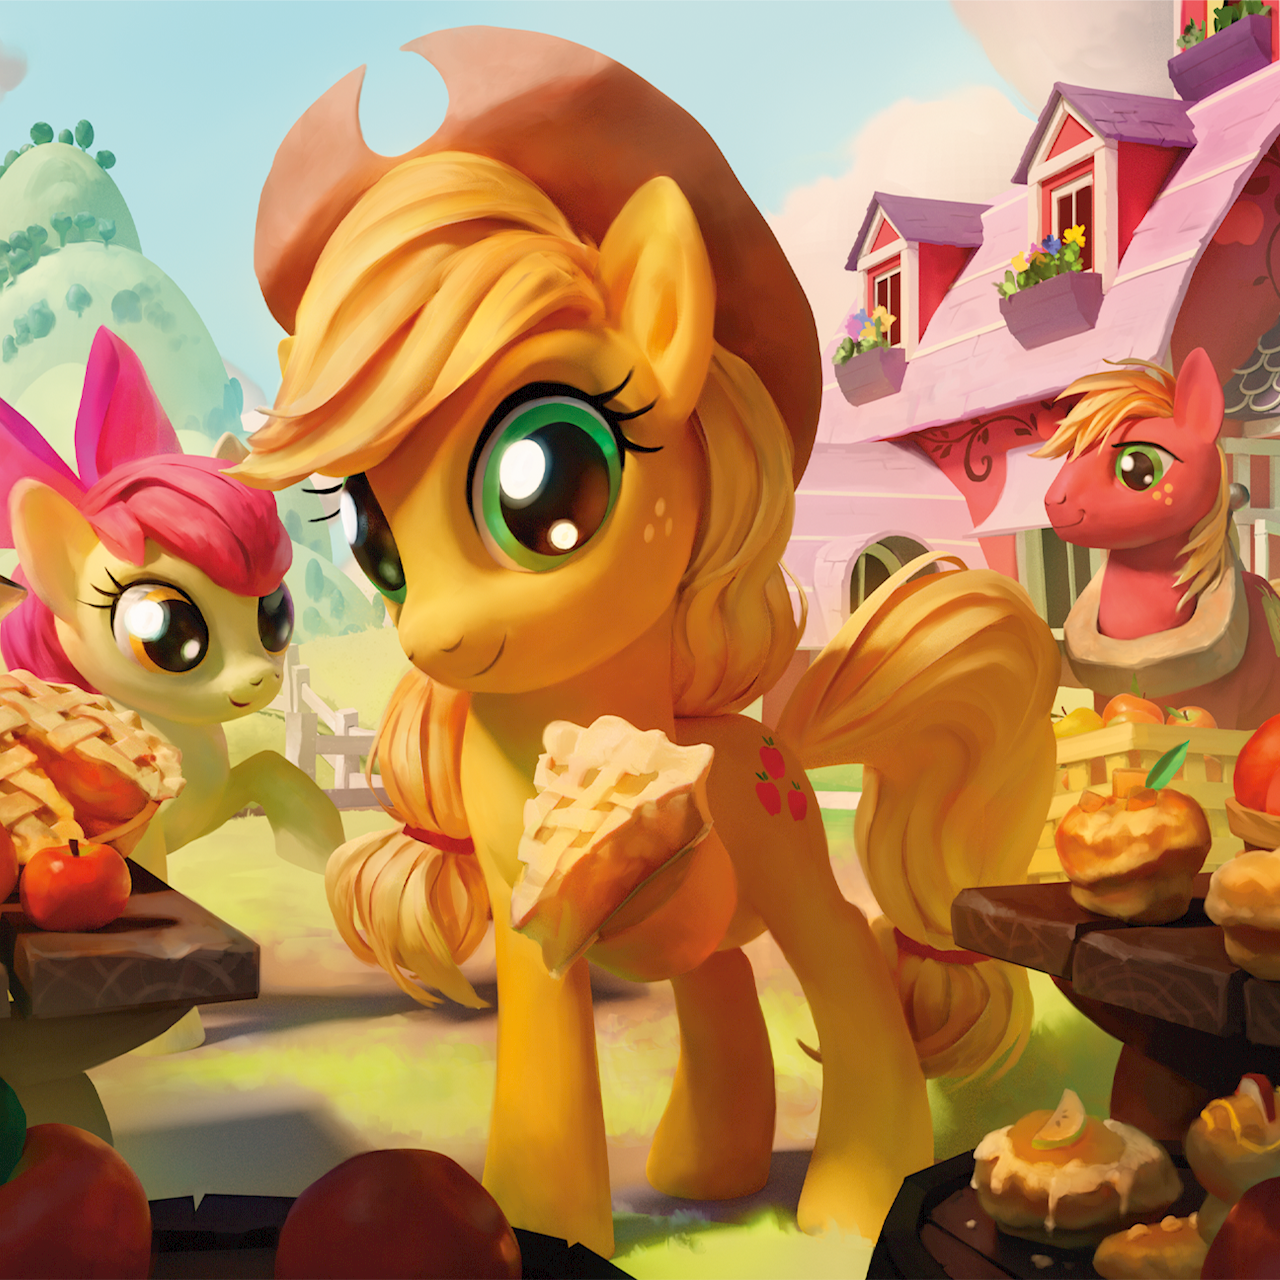 The magical world of MY LITTLE PONY gallops onto consoles and PC this year  for a whole new generation!